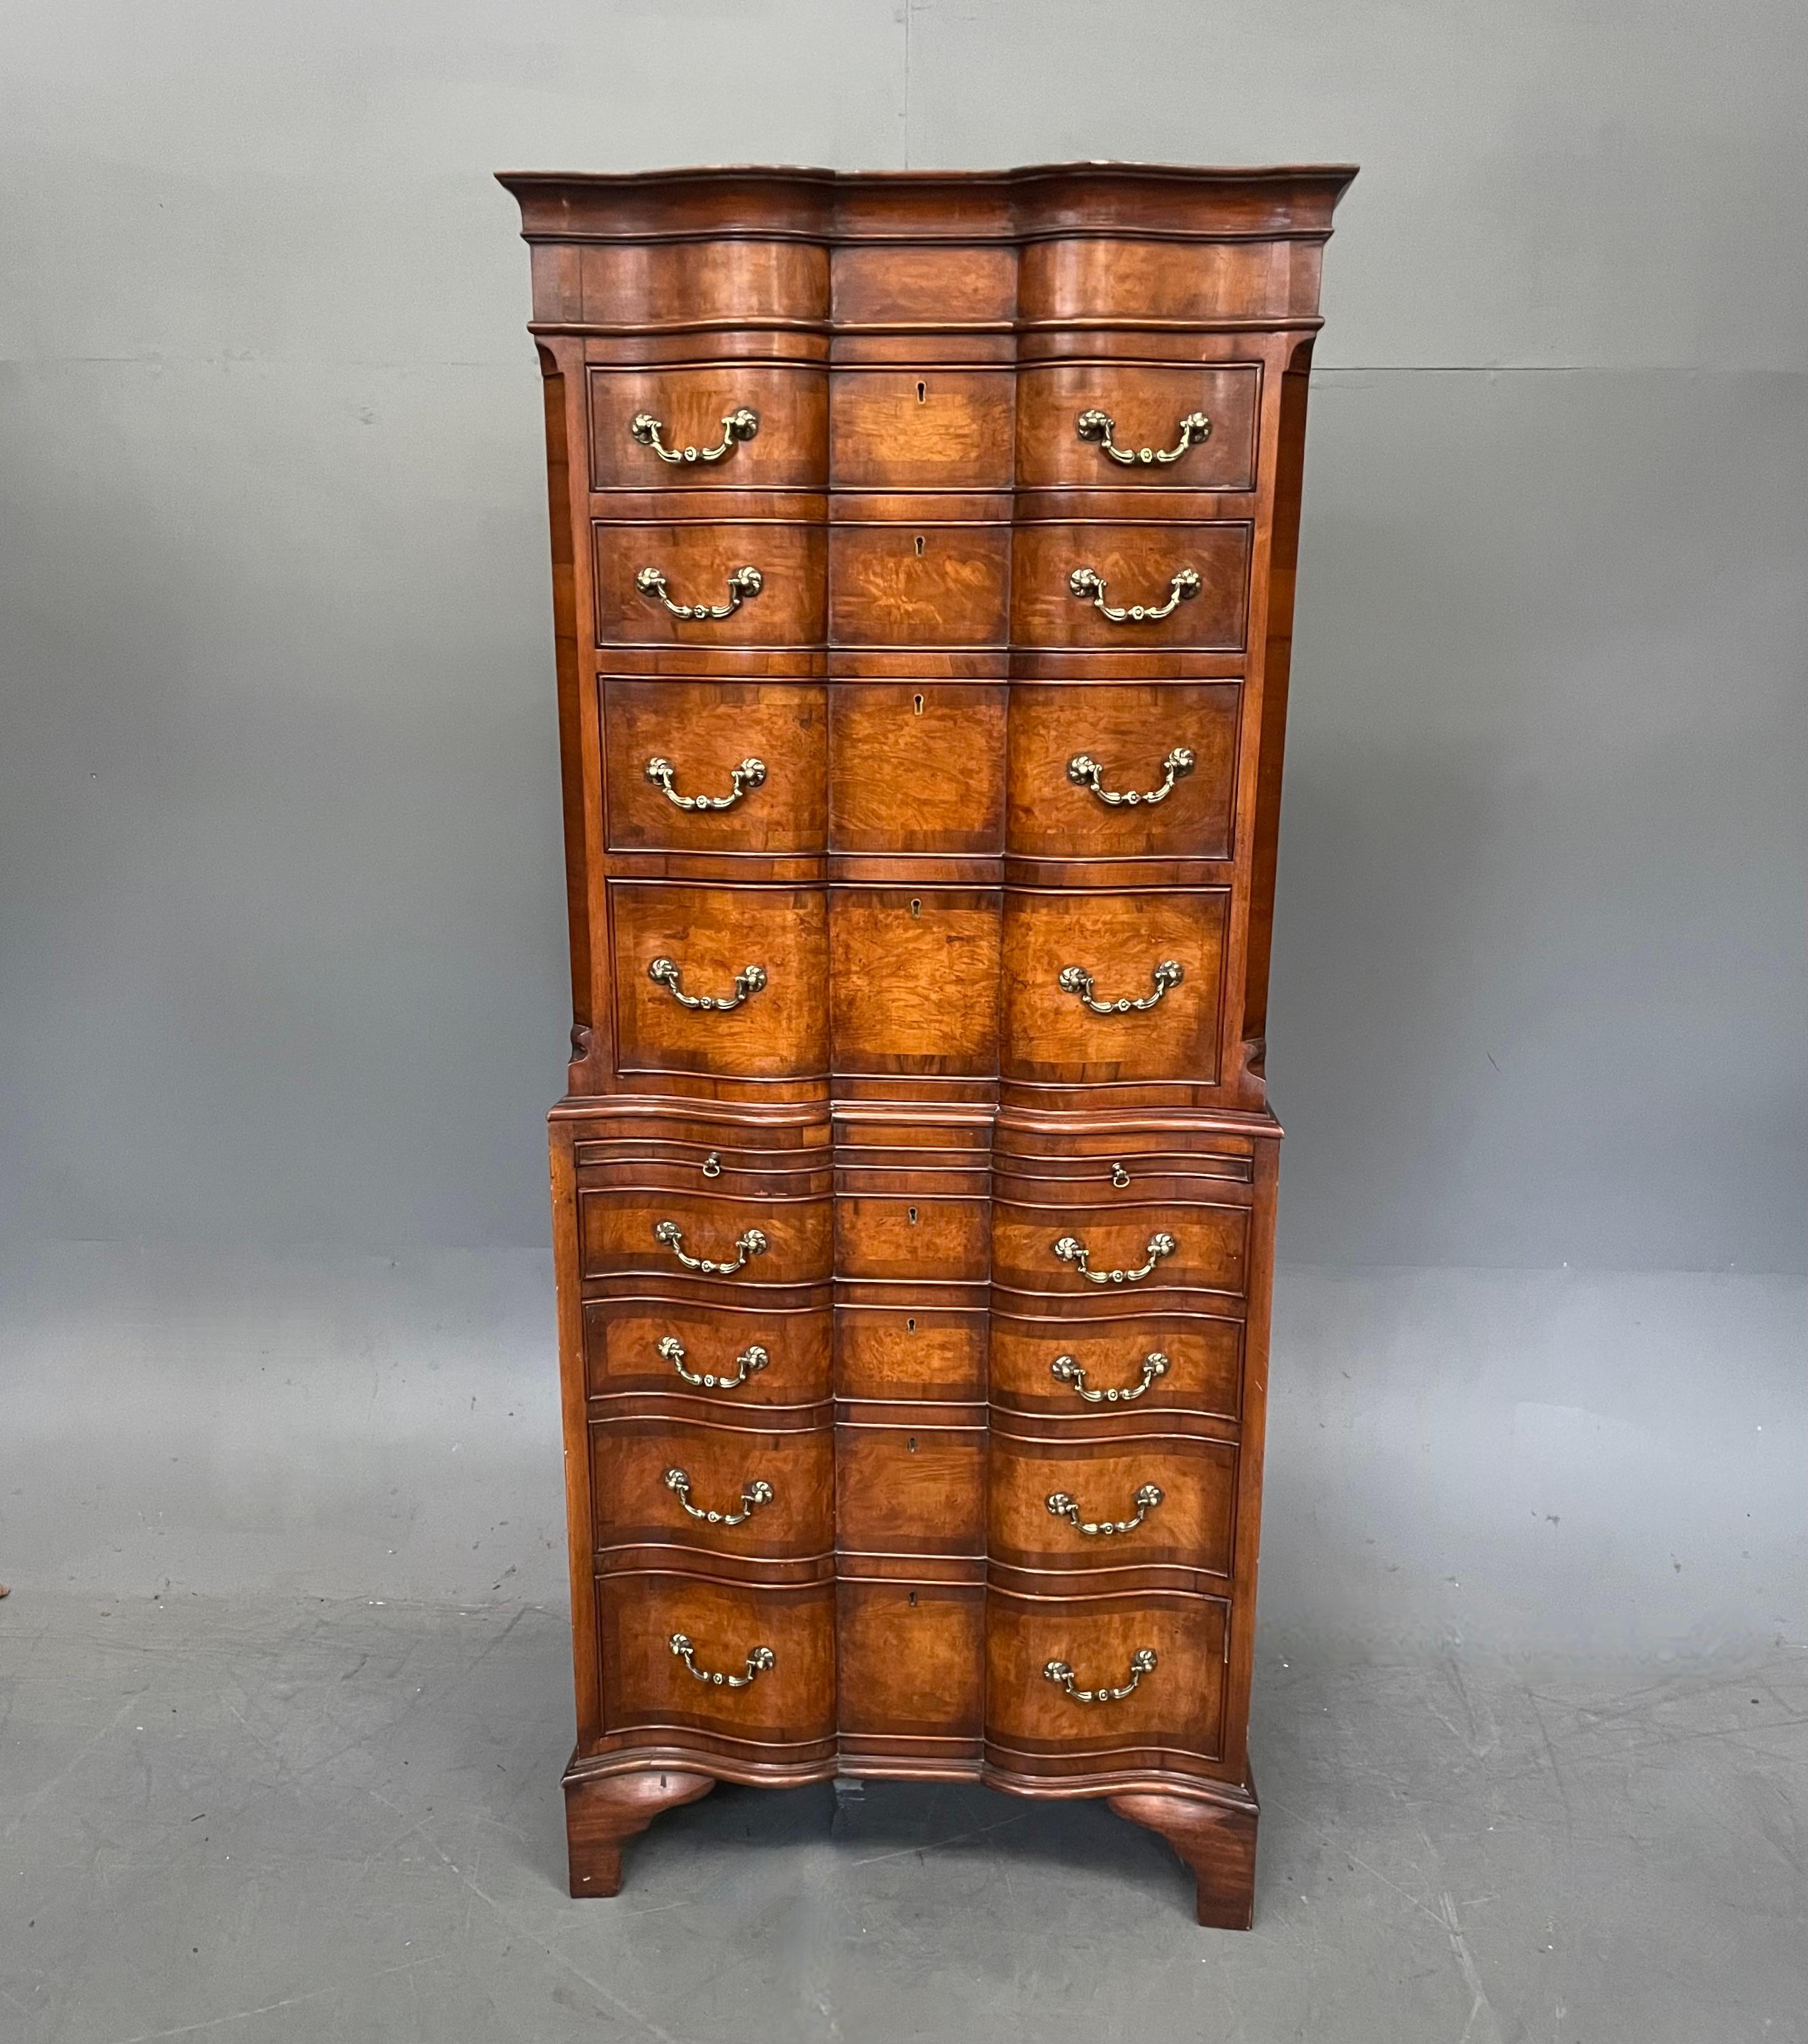 Good quality burr walnut tall boy chest on chest .
The chest has a wonderful shaped front with 8 graduating drawers that are hand dovetail jointed .
with wonderful decorative brass swan neck handles ,with a central brushing slide 
It has a great